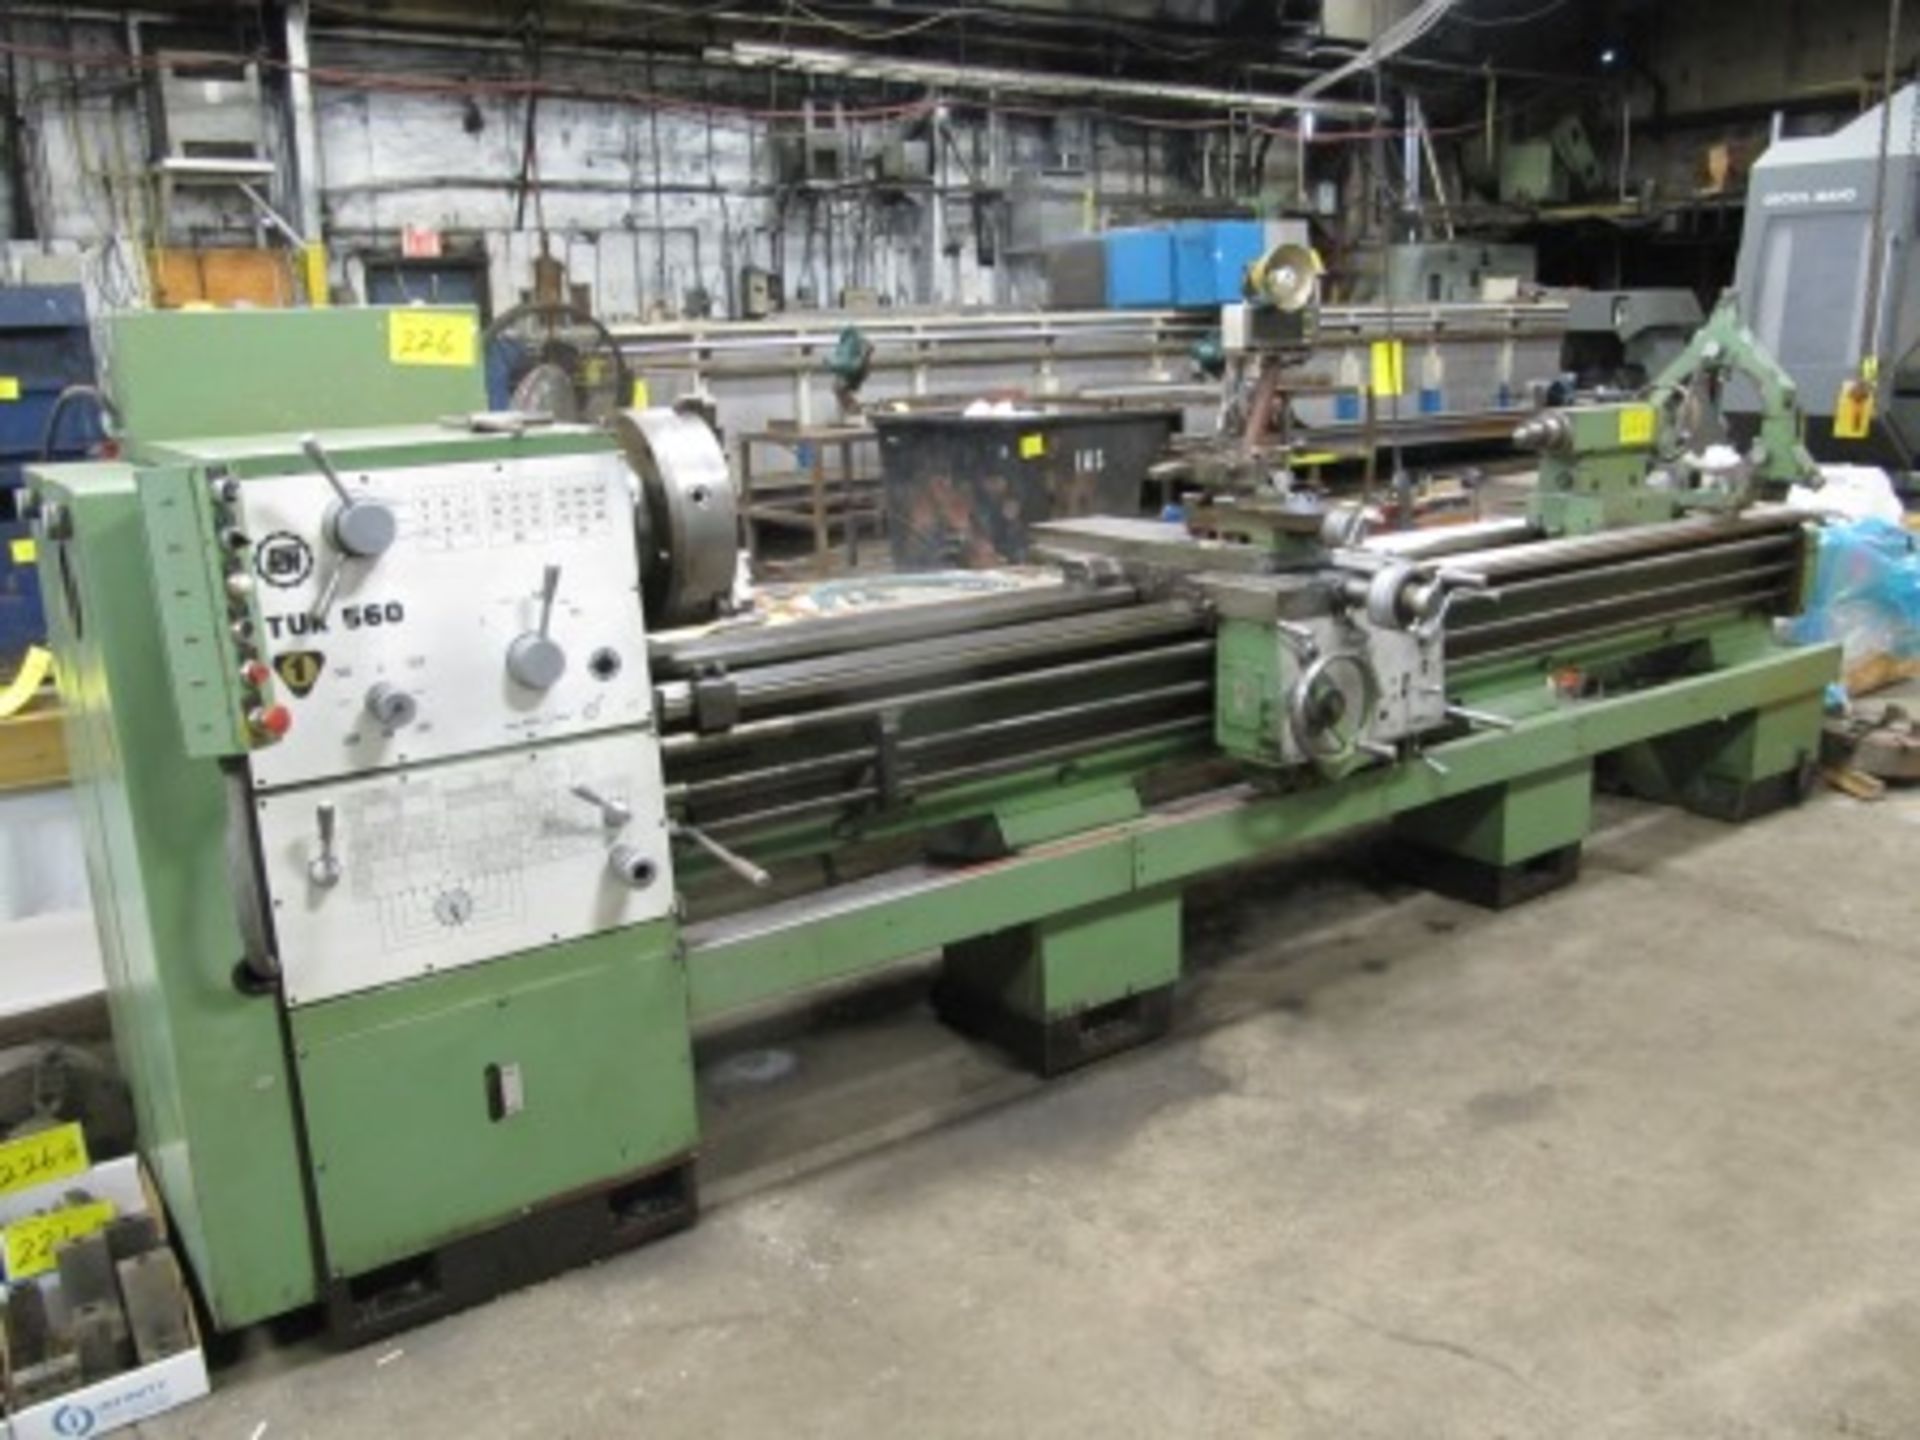 FAT TUR 560 ENGINE LATHE, 16" 3-JAW CHUCK, 22" SWING, 141" BED W/MITUTOYO 2-AXIS DRO S/N: 48409